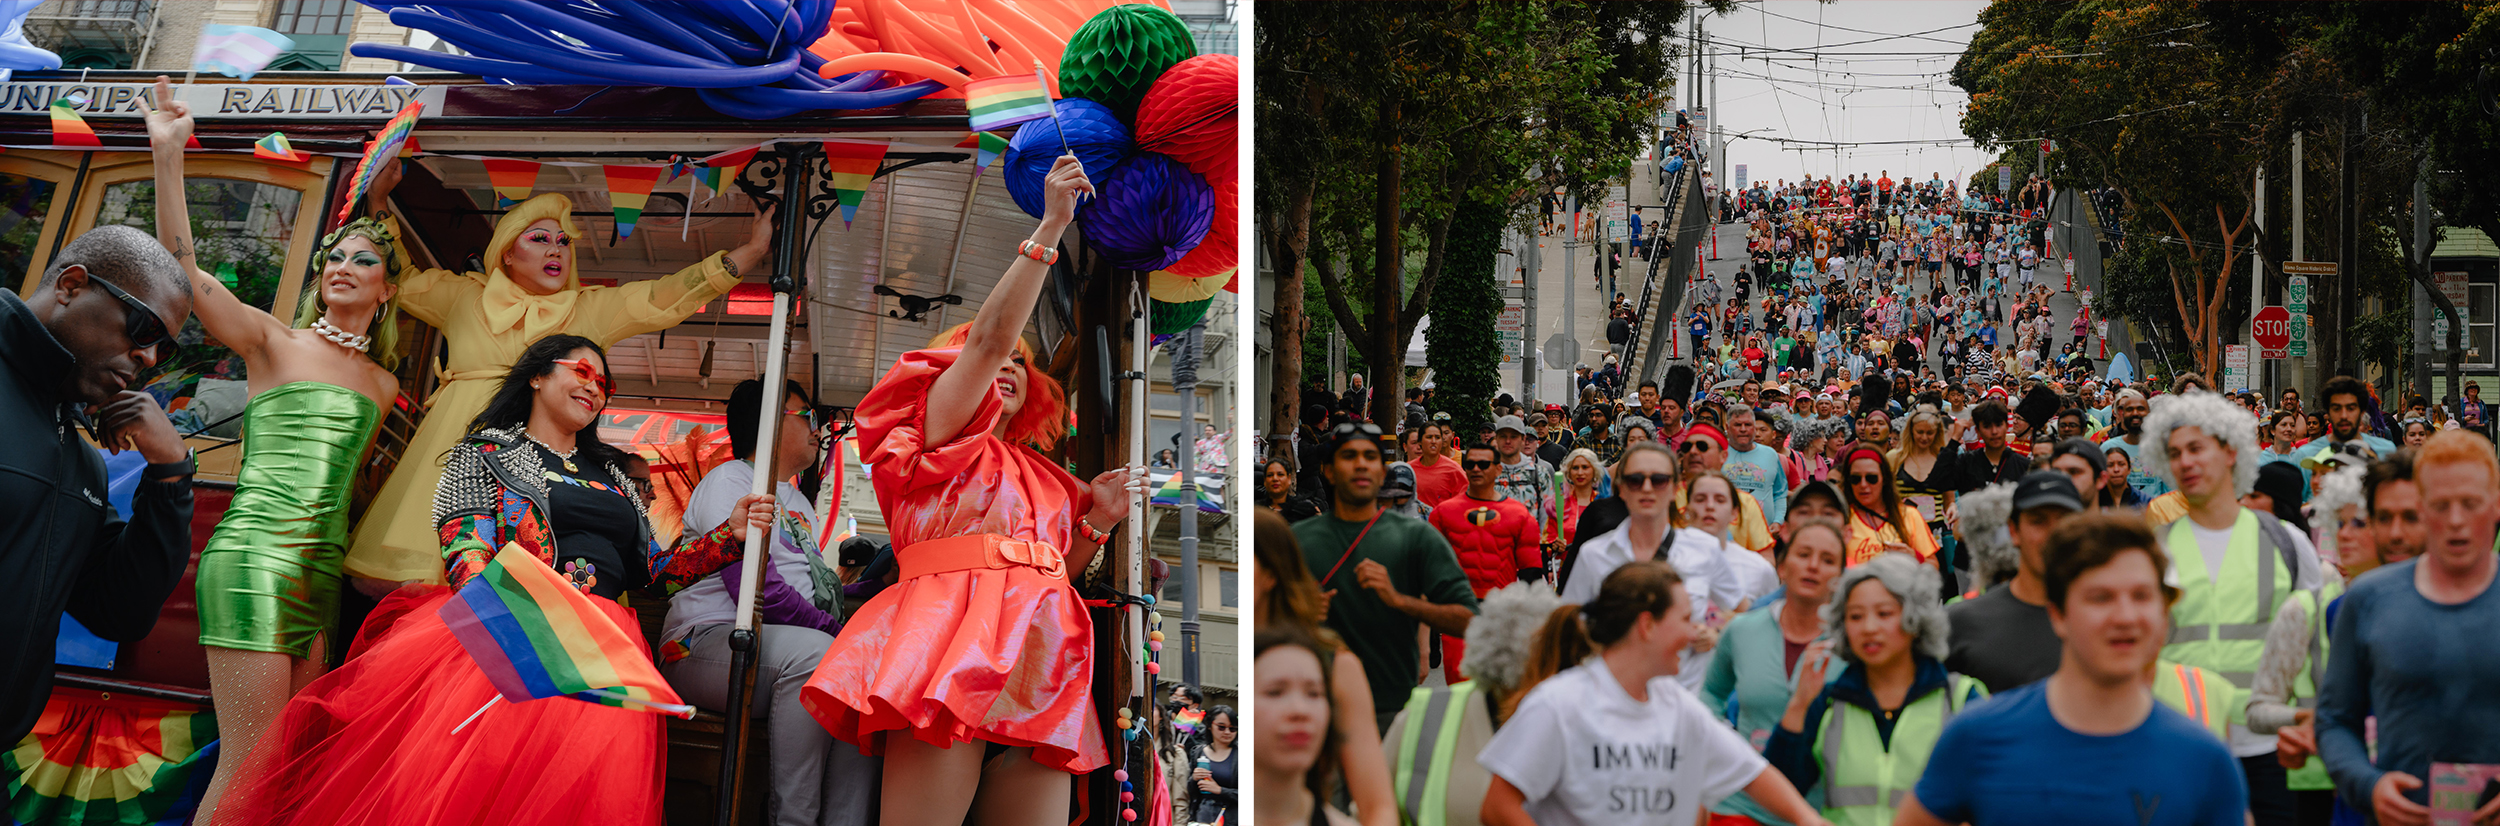 Two photos: On the left, A group of colorfully dressed people ride a cable care waving pride flags. On the right, A crowd of people pack a city street.